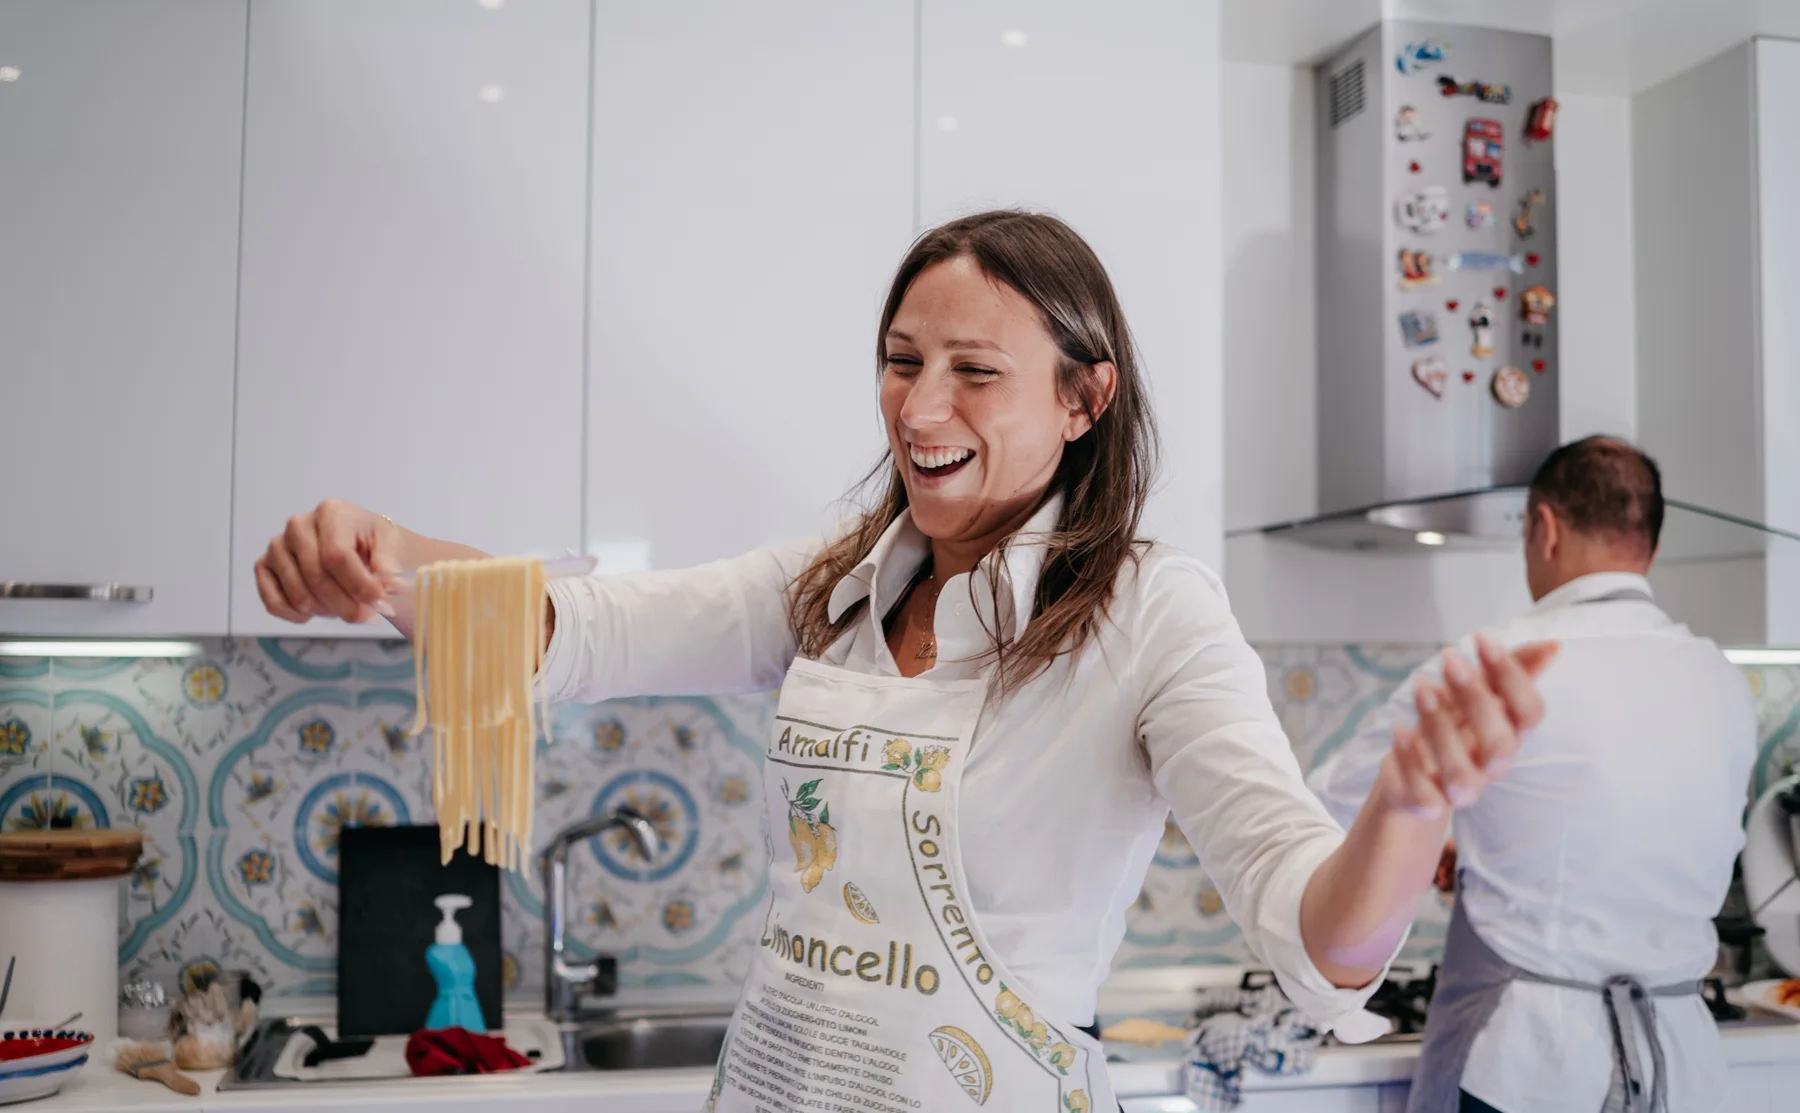 Learn To Make Fresh Pasta With Love - 1558366